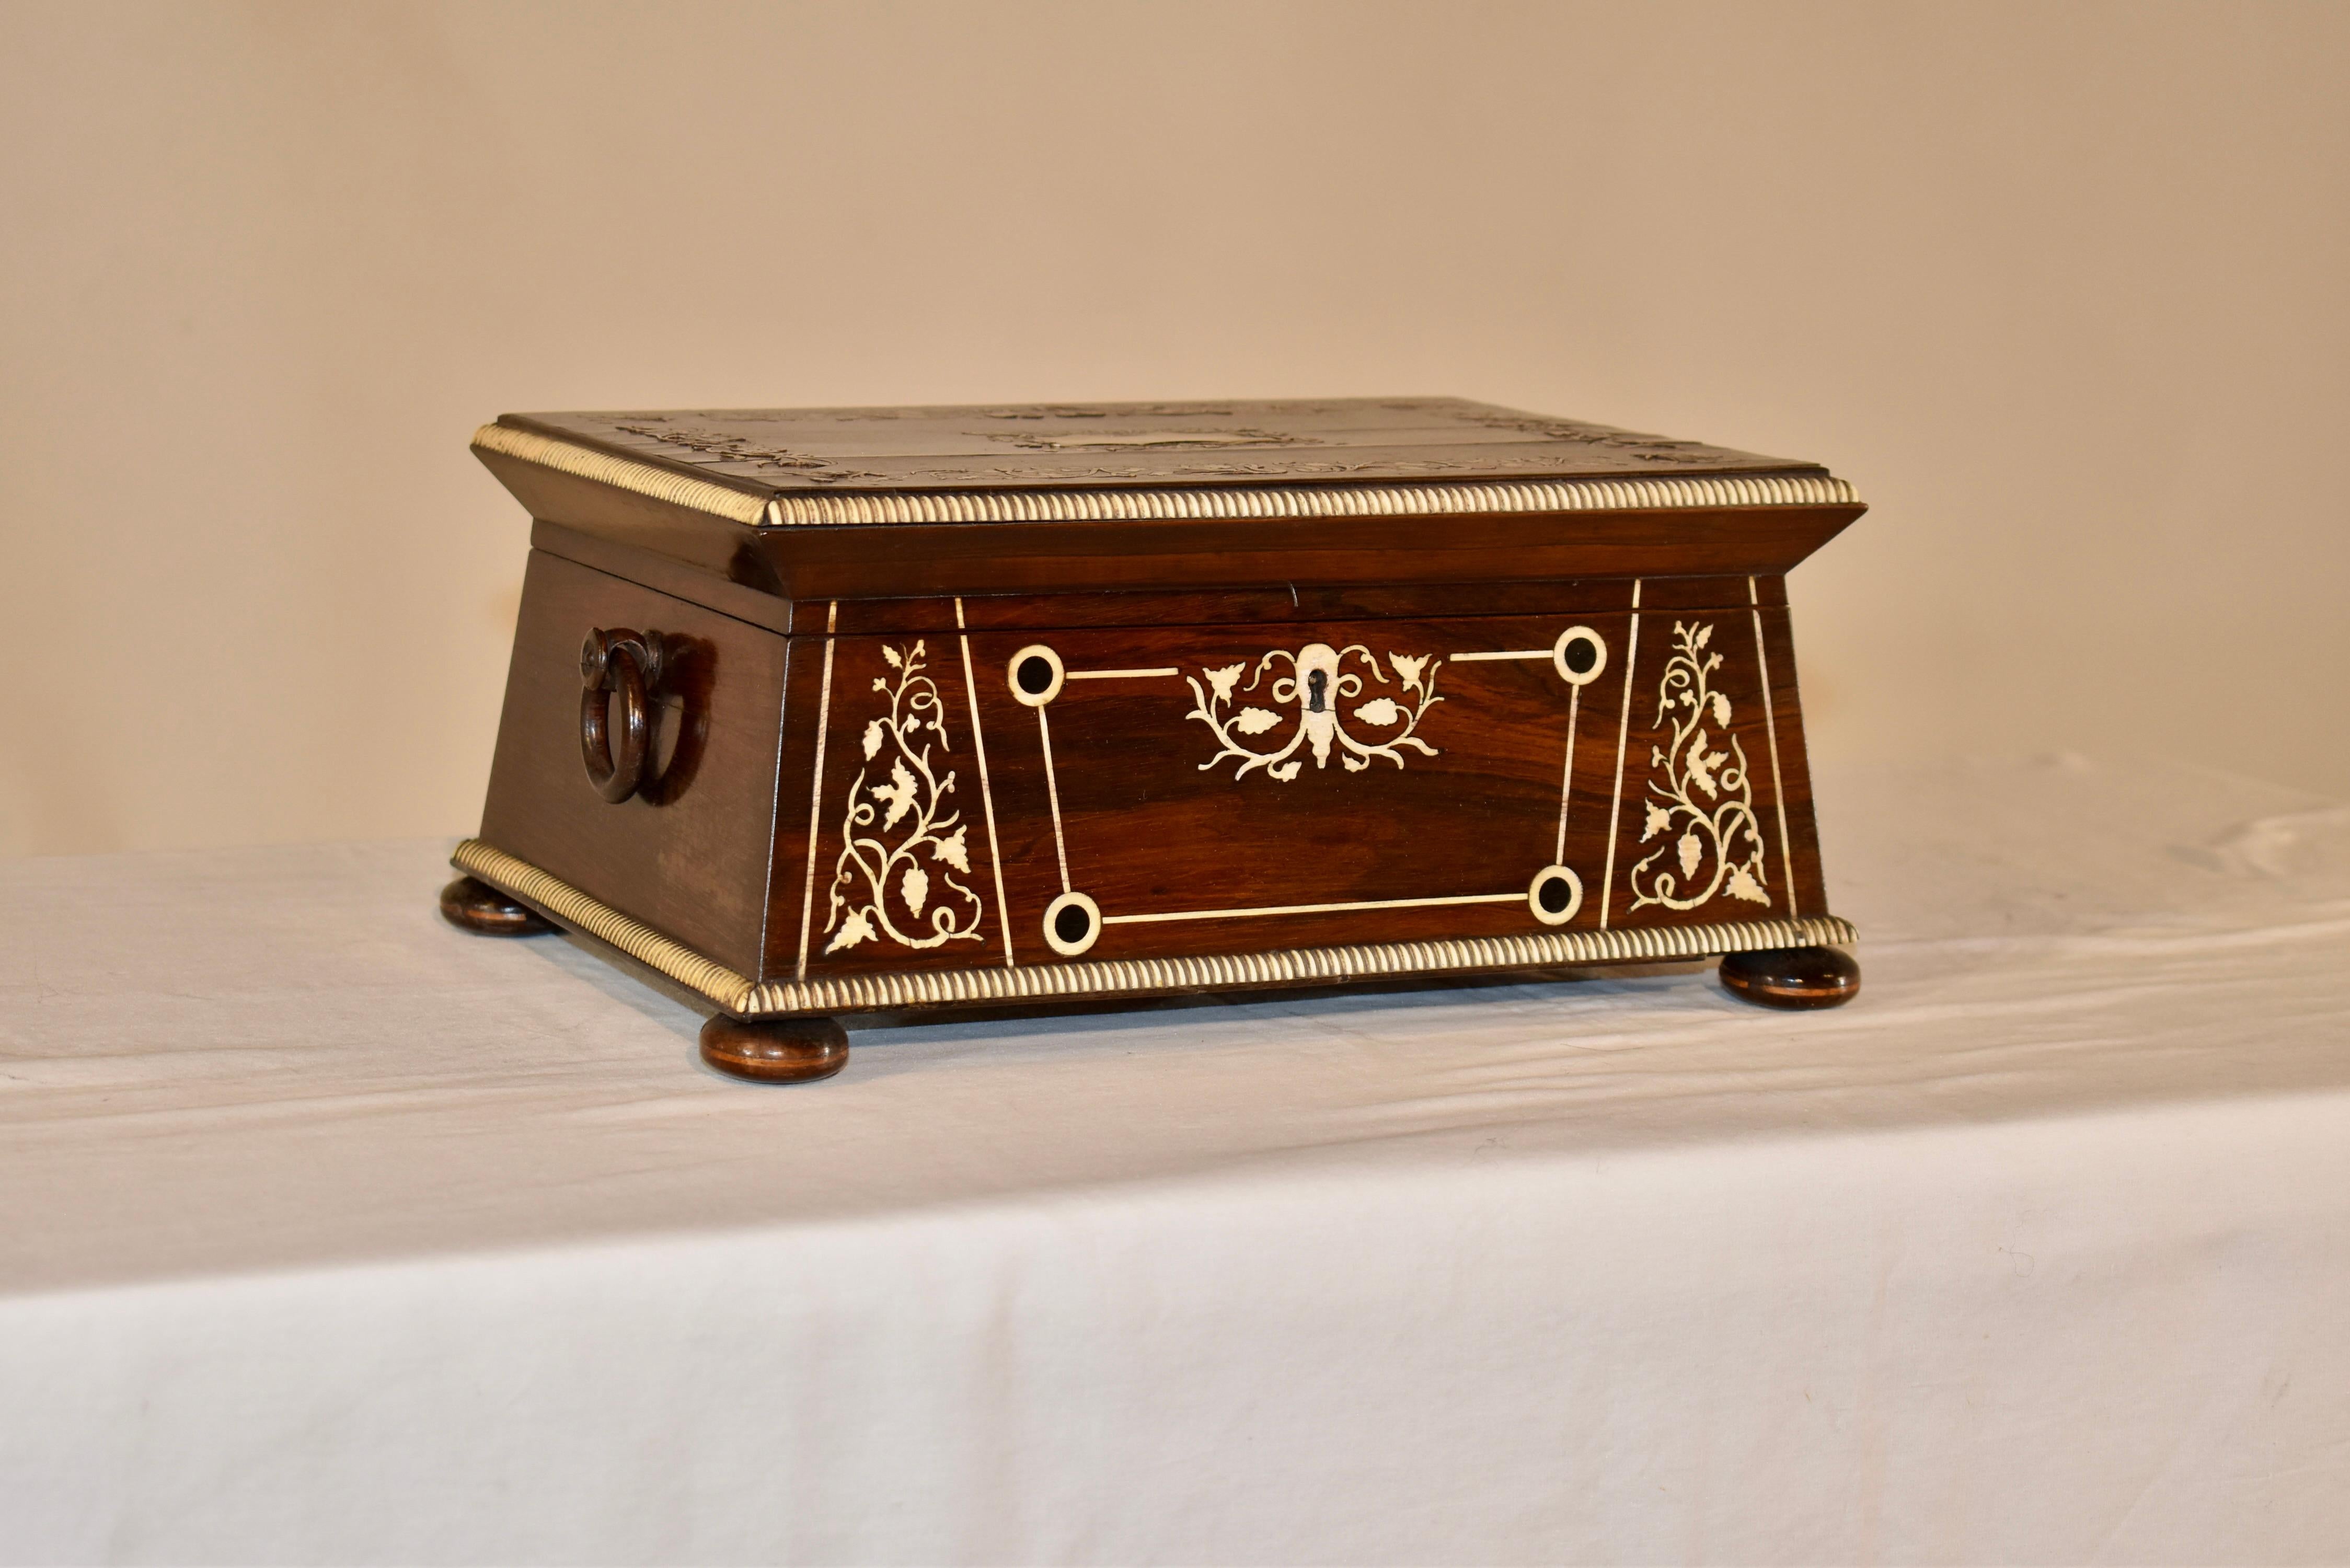 19th century English dresser box made from exquisitely grained rosewood.  The box has wonderfully inlaid patterns on the top and front in ivory, along with the beaded ivory trim.  There are two handles on either side of the box, and the box is